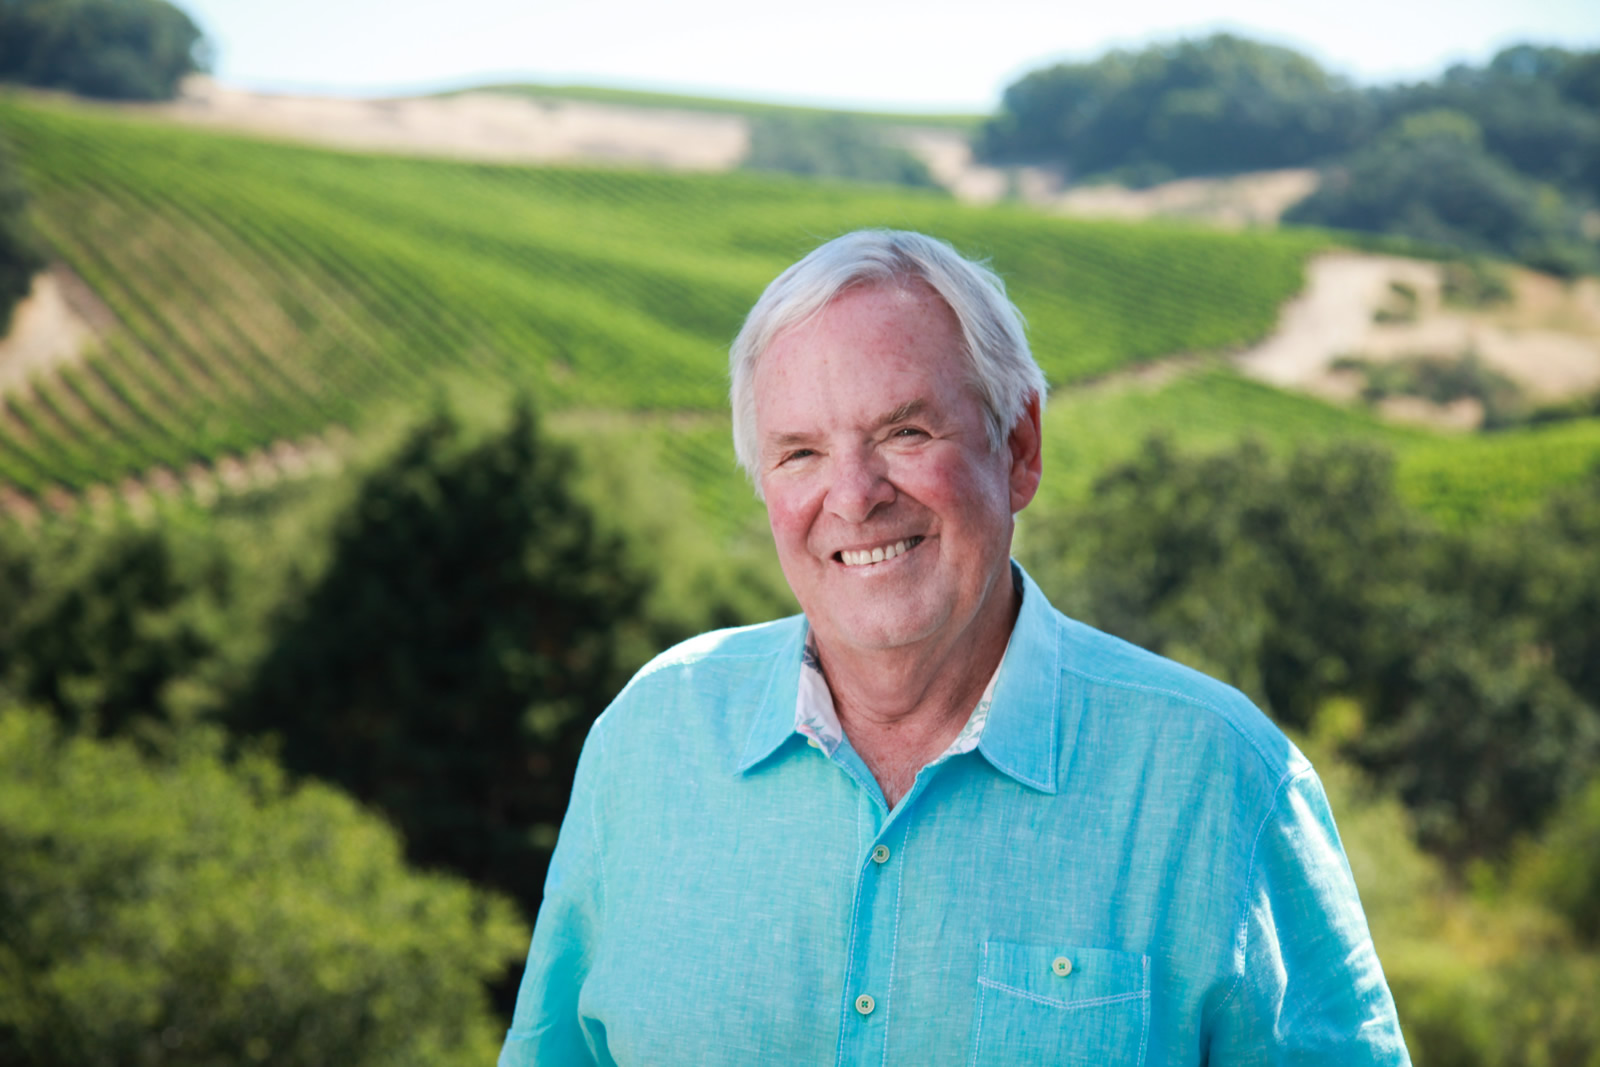 Head and Shoulder Image of Bill Foley of Foley Family WInes